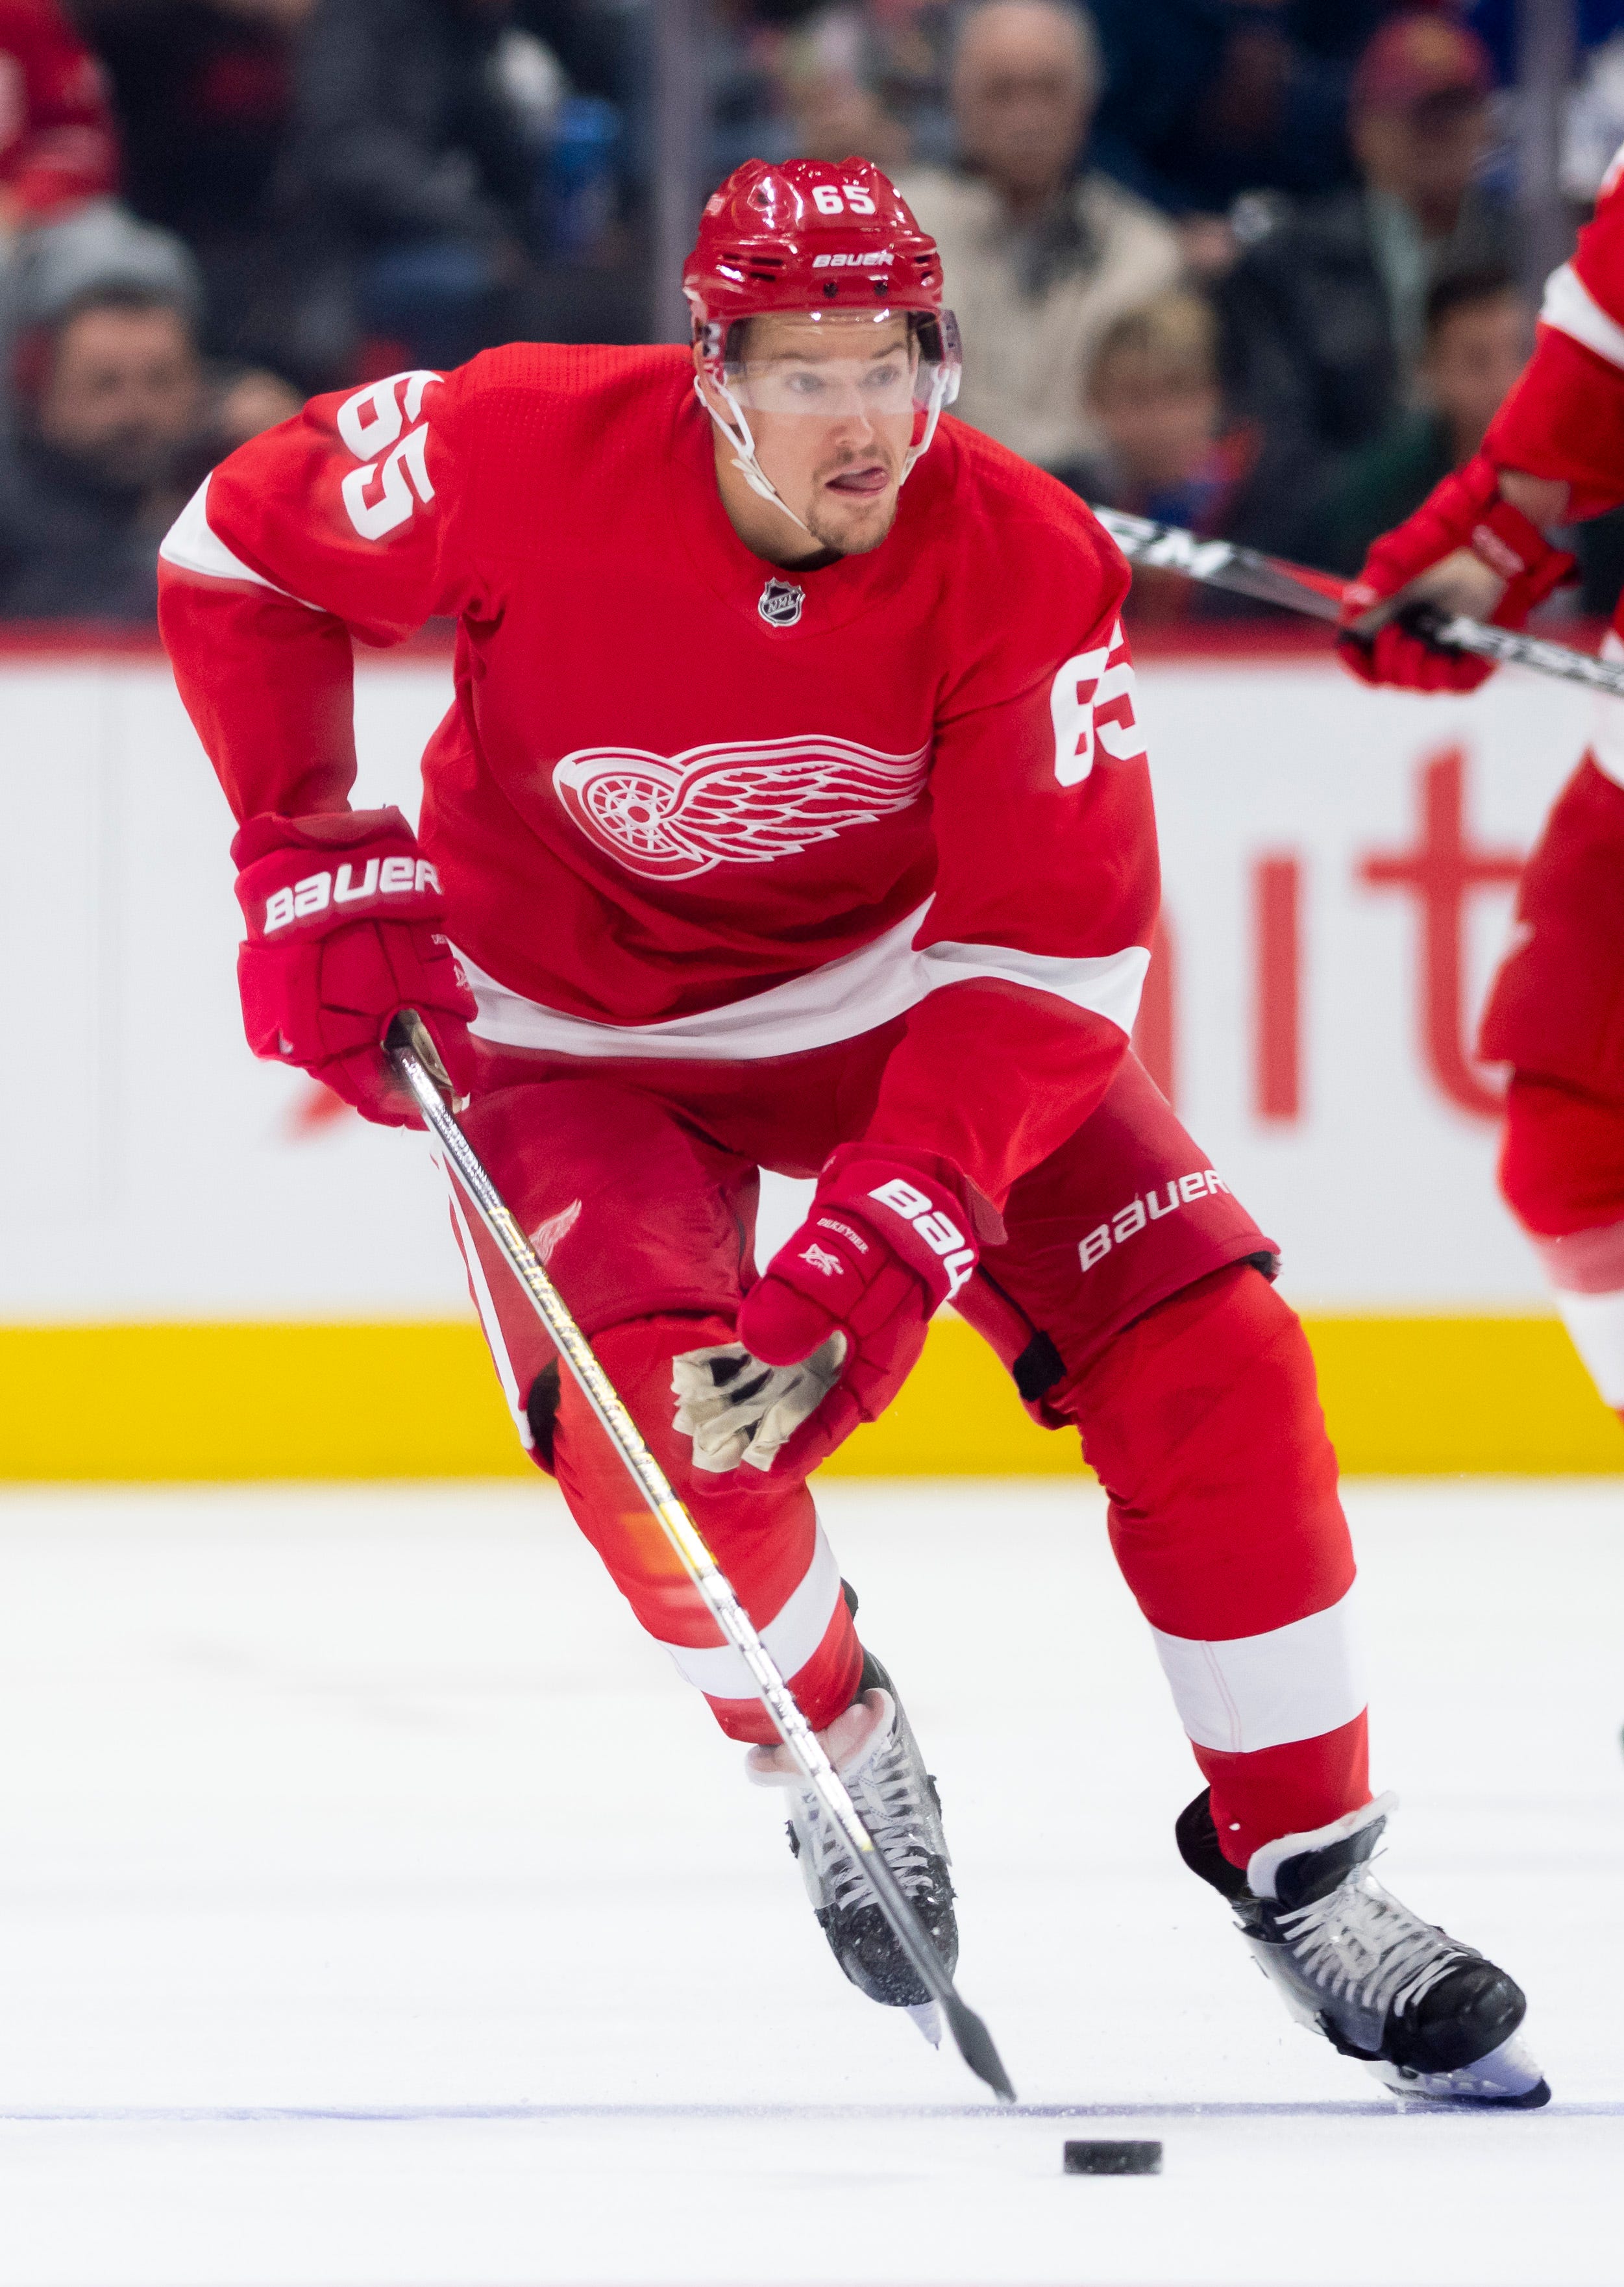 7. Danny DeKeyser, defenseman. For all the fans’ complaints about DeKeyser’s long-term contract, inconsistency, failure to progress, he was easily the Wings’ best overall defenseman. DeKeyser, 29, was limited to 52 games because of injuries, but solidified himself as the team’s No. 1 defenseman.